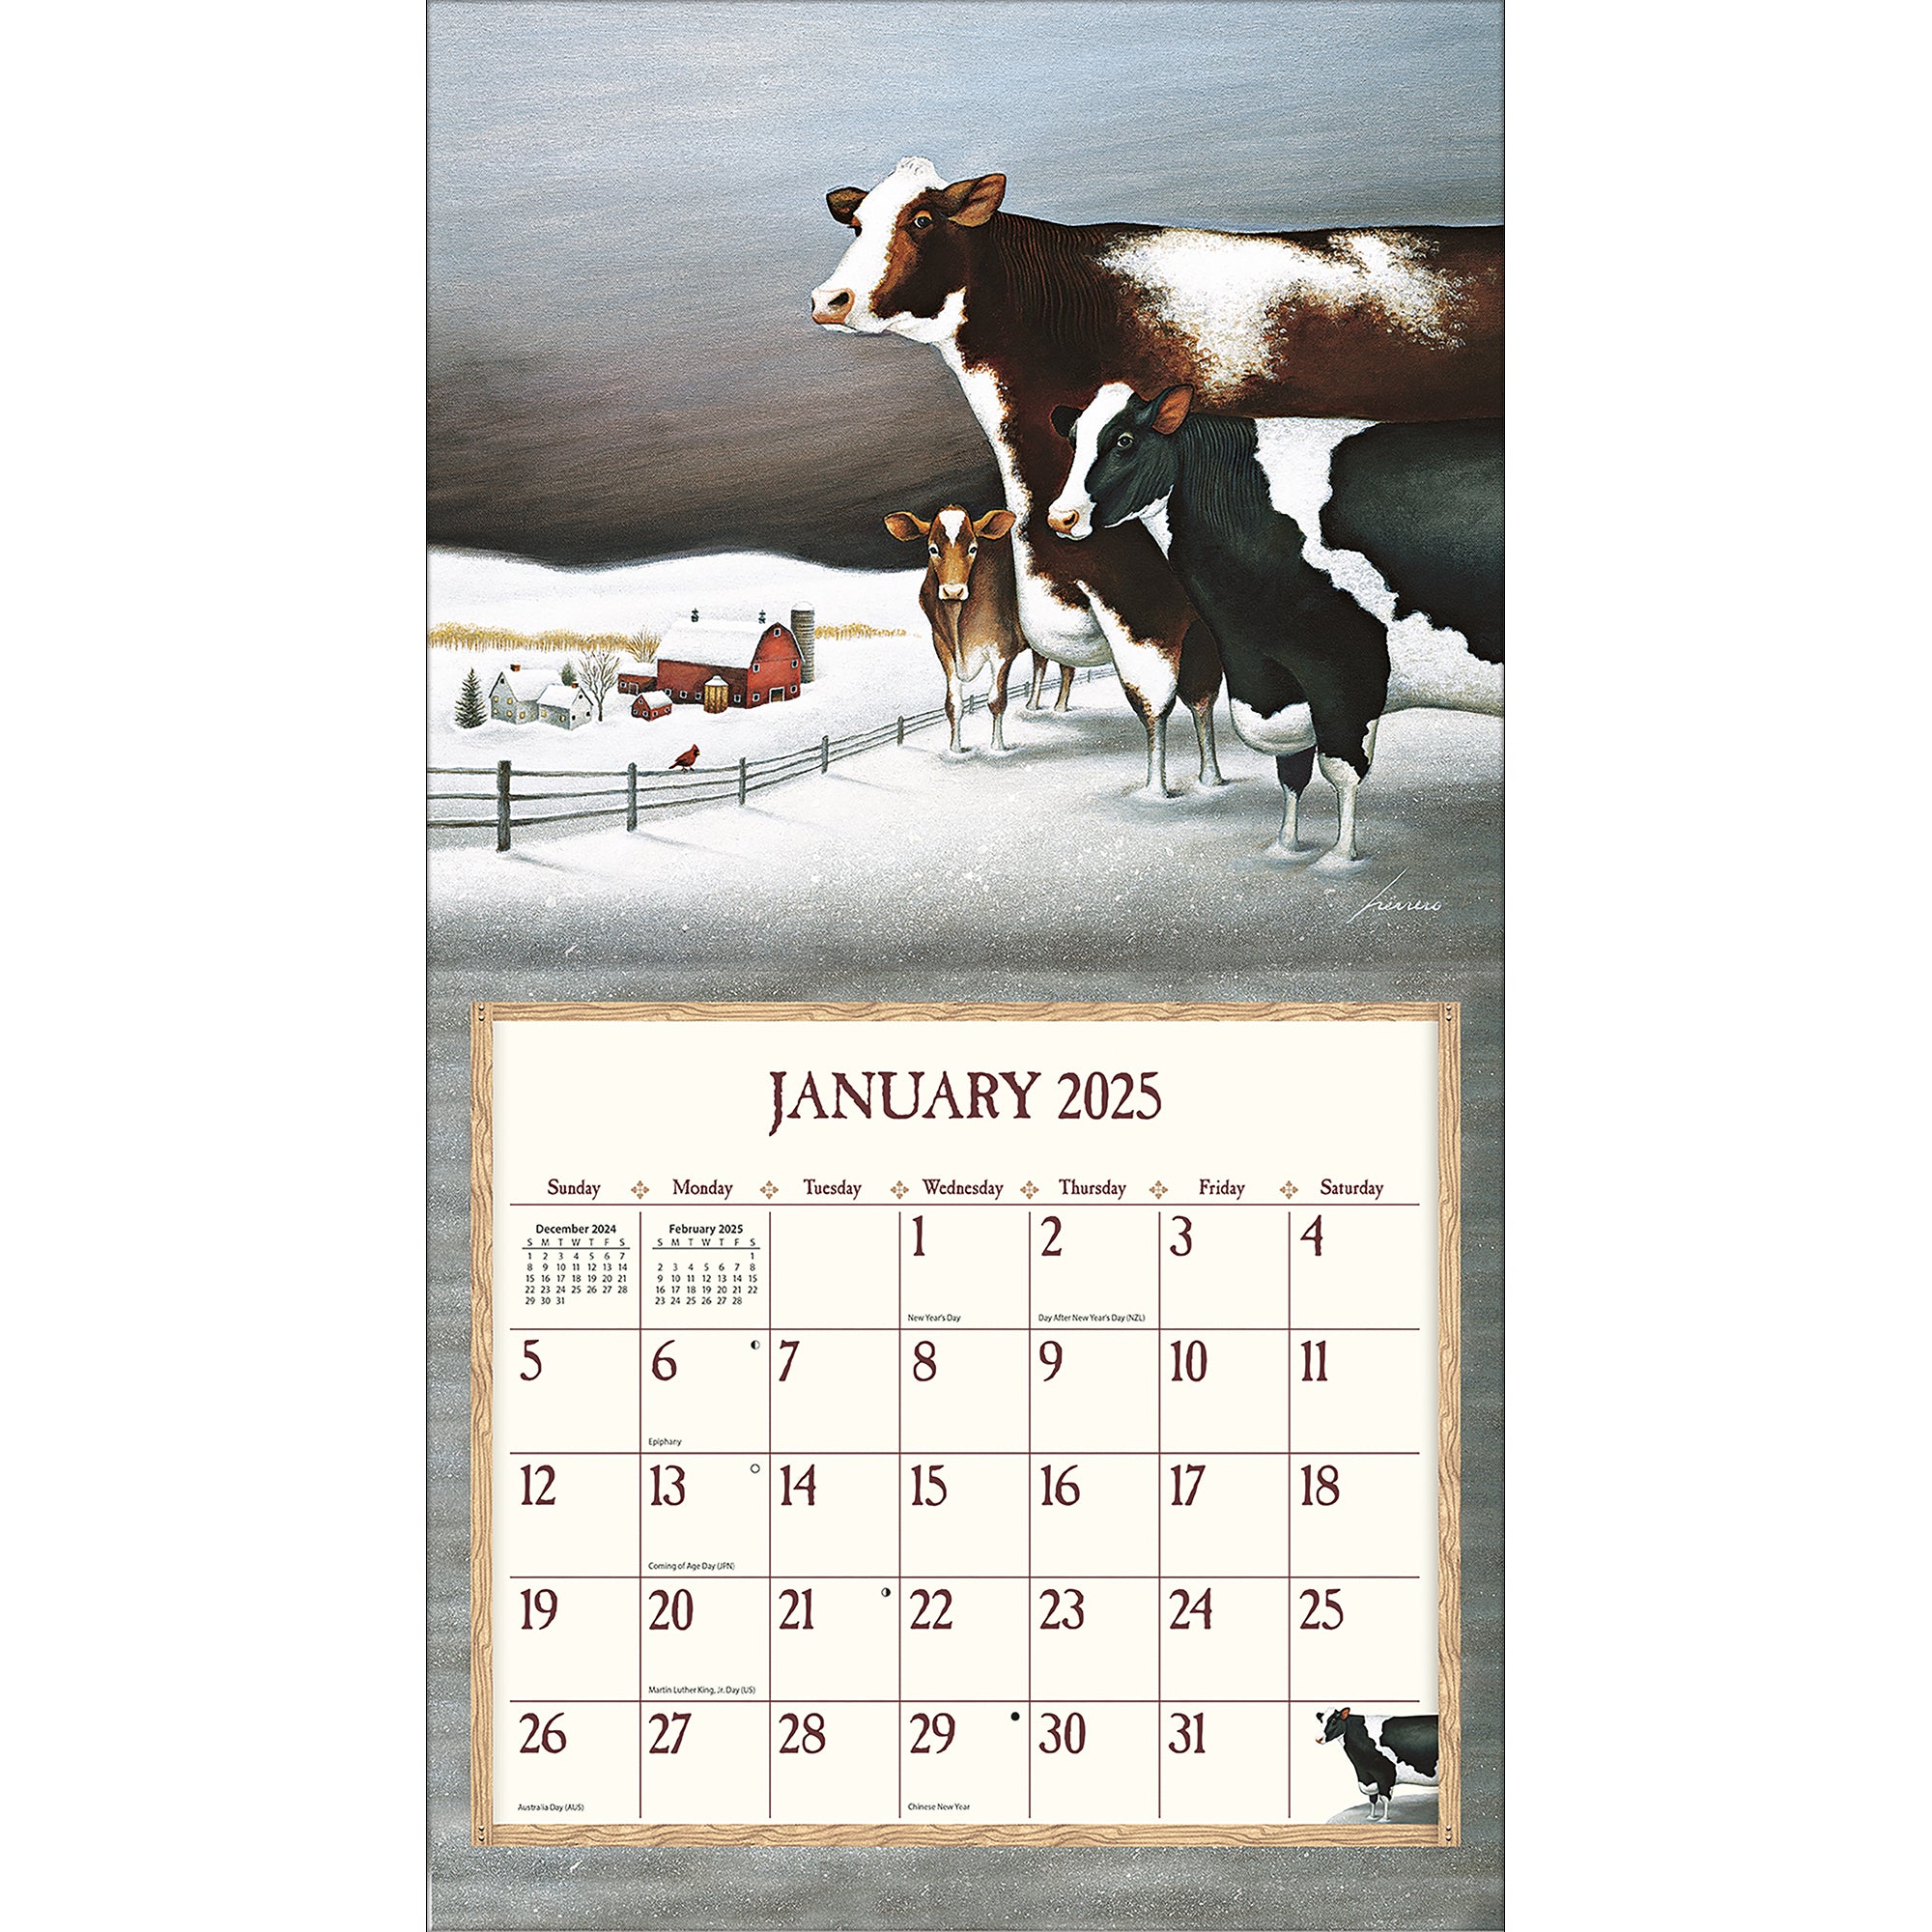 2025 Cows Cows Cows By Lowell Herrero - LANG Deluxe Wall Calendar